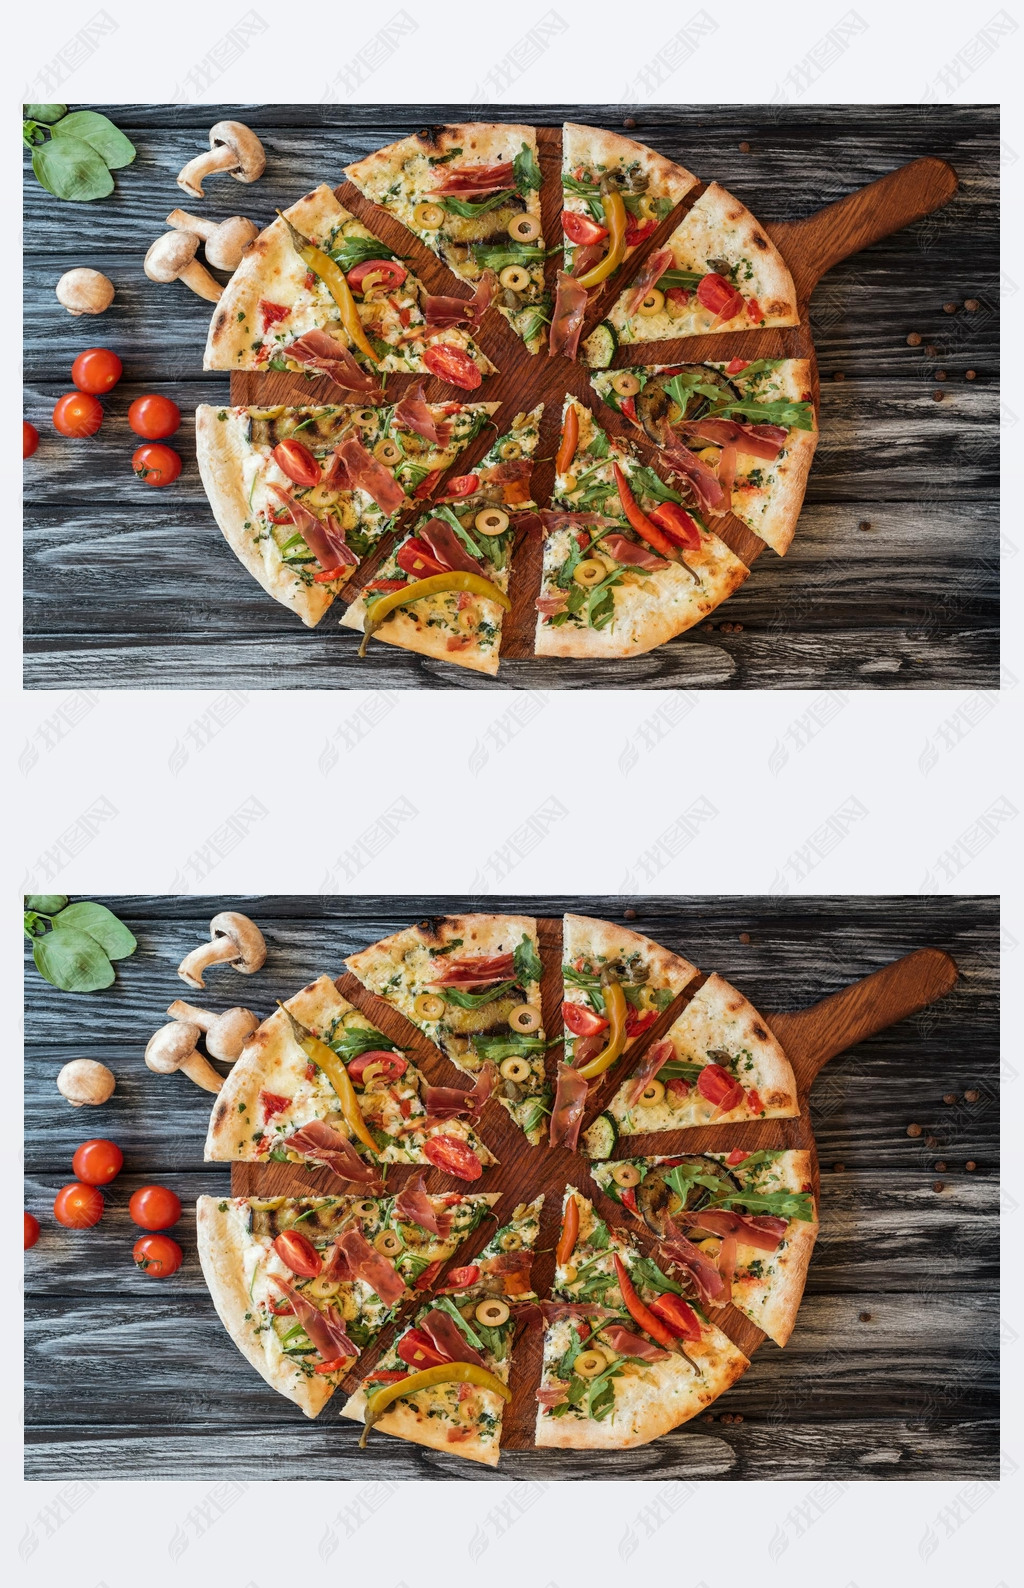 top view of sliced delicious pizza with vegetables and meat on wooden cutting board  